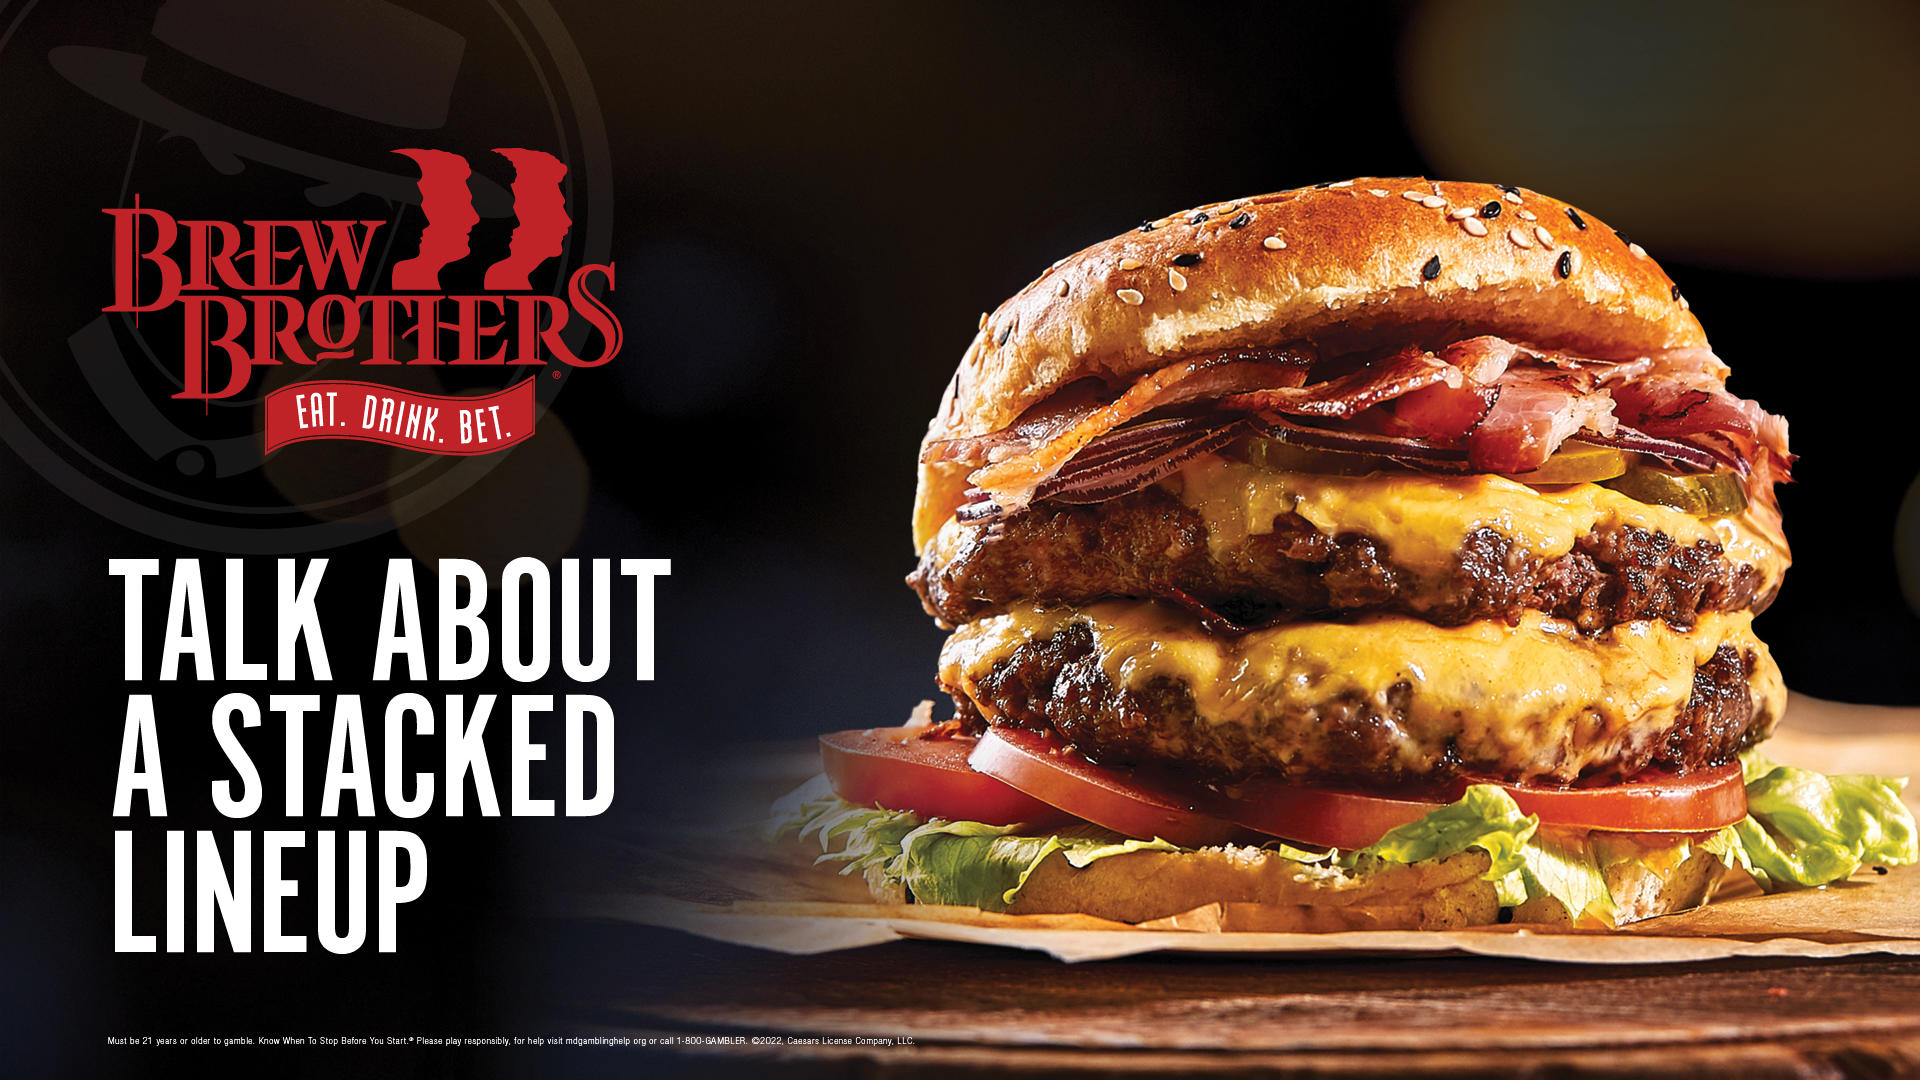 Stacked burgers can be found at Brew Brothers in Horseshoe Black Hawk